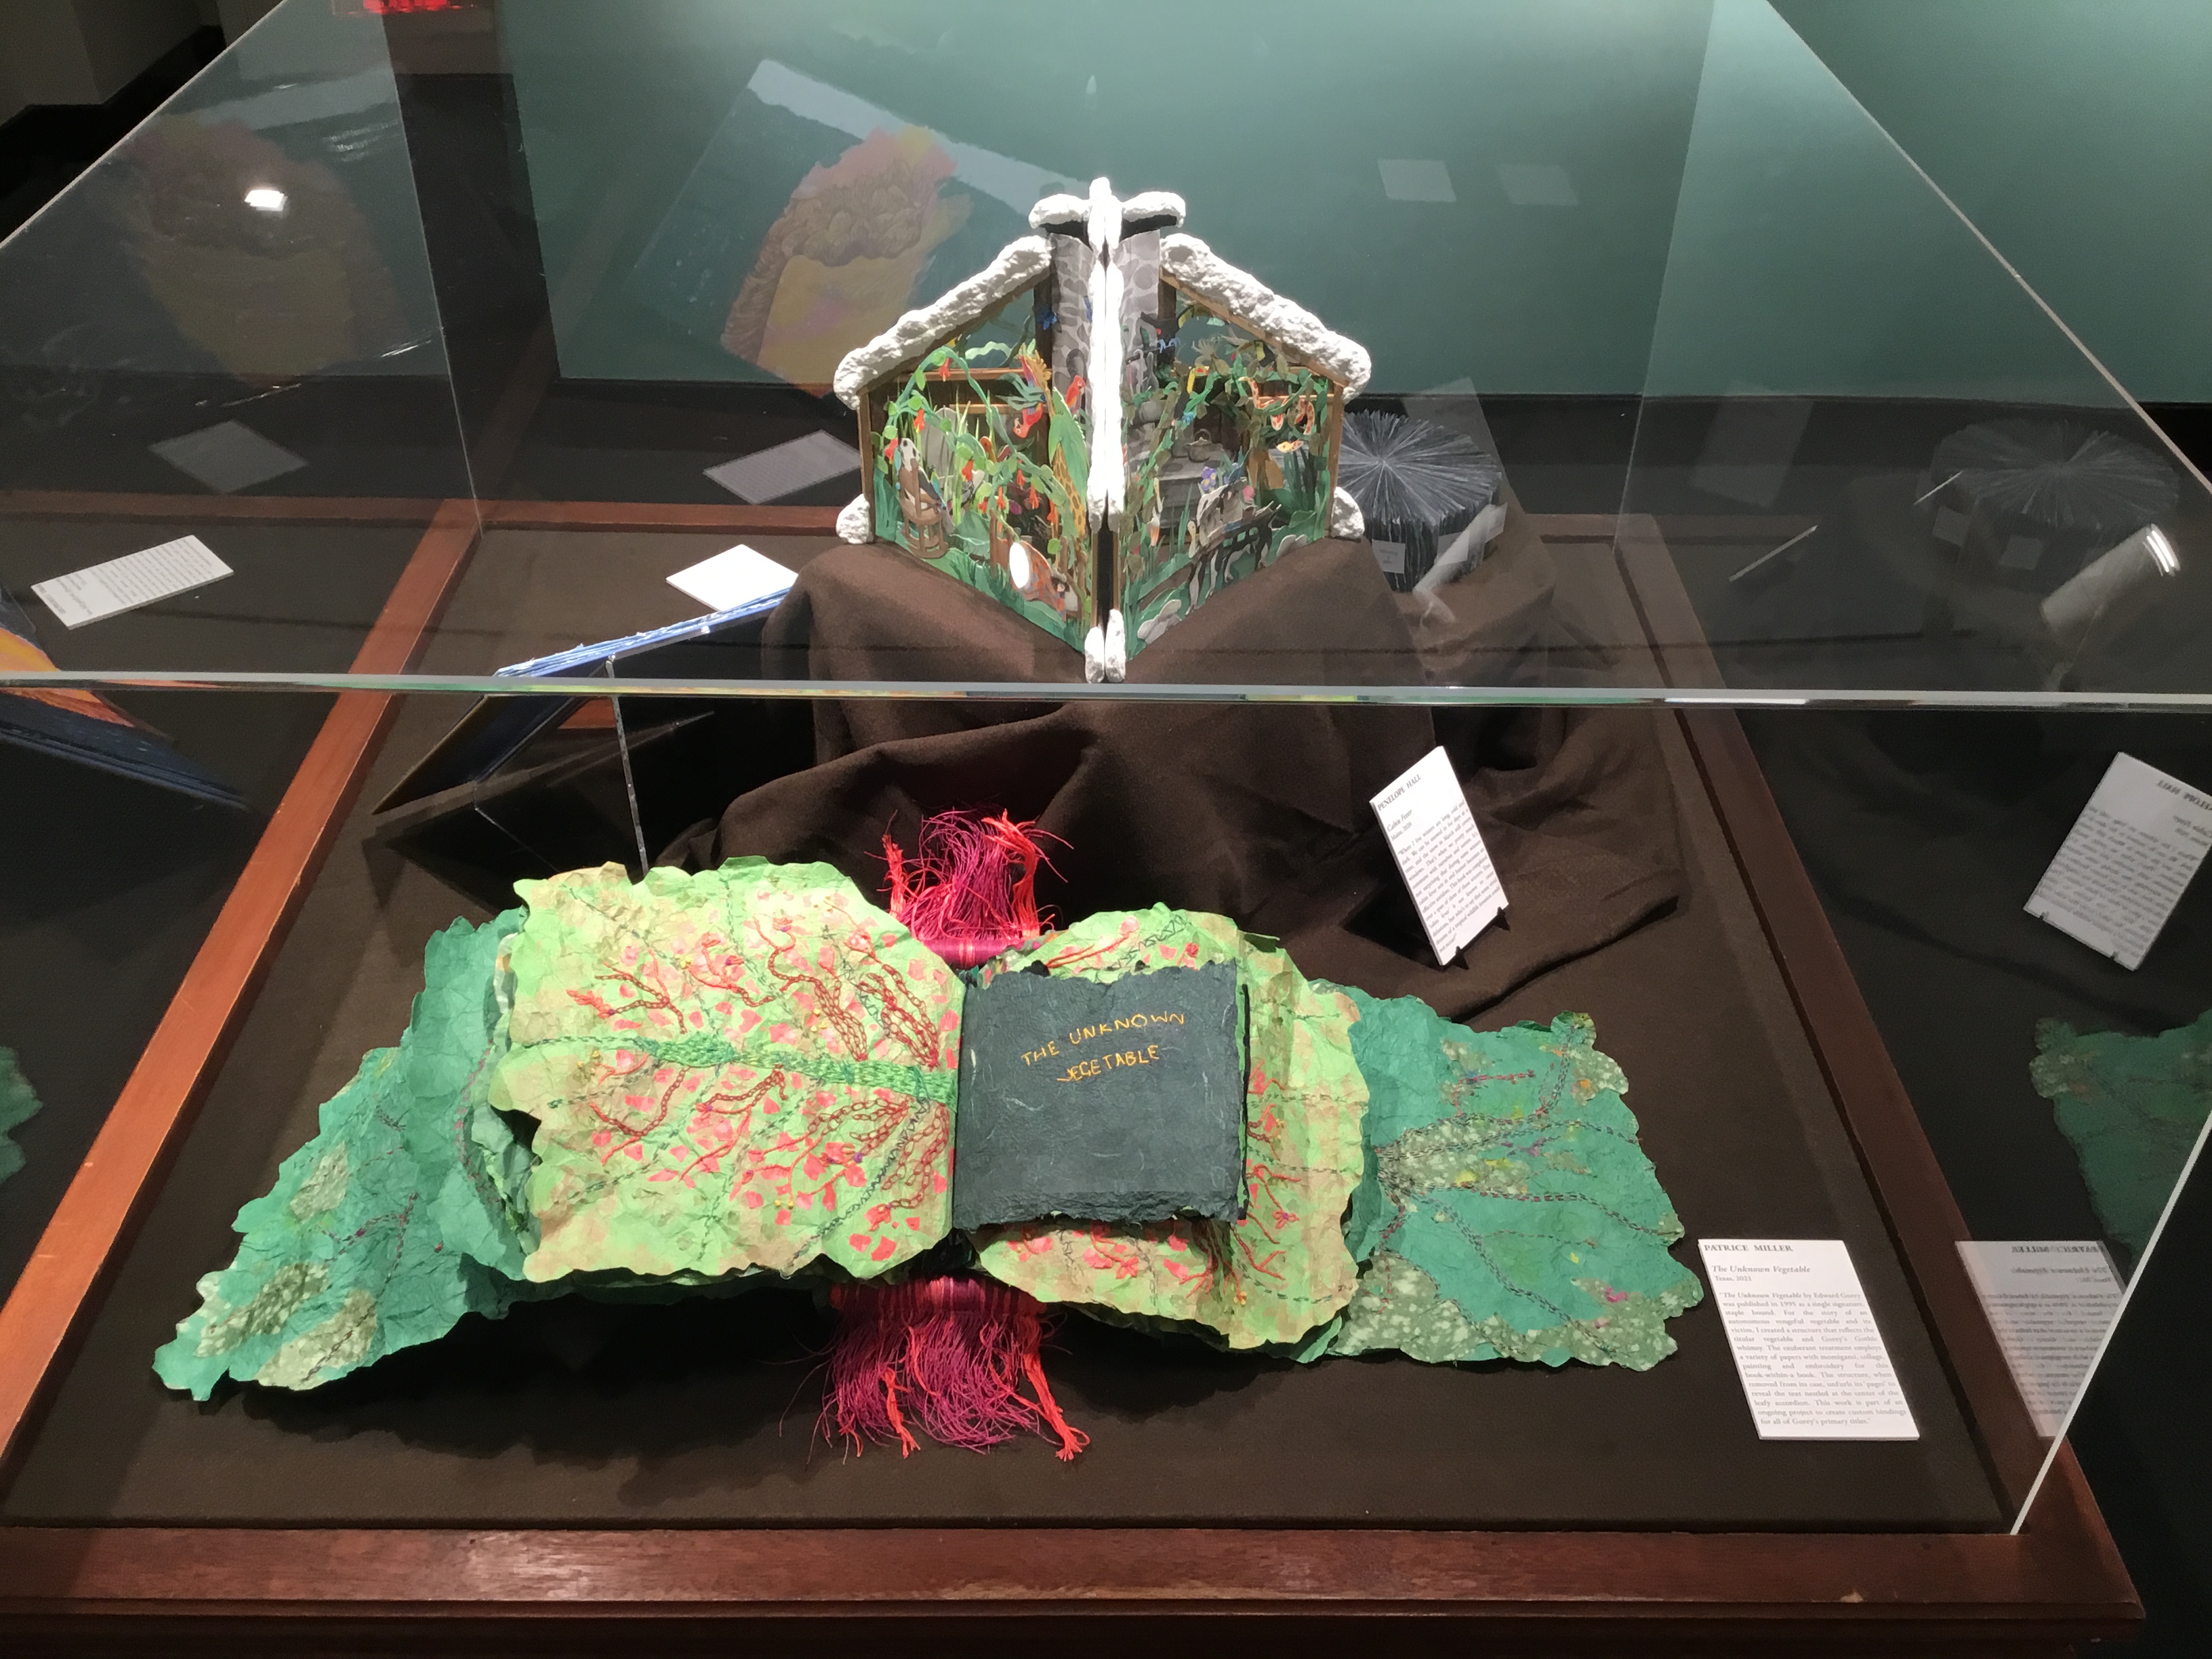 A plexiglass floor case in the small gallery displaying several books: the foremost book, a salad of leafy green paper pages flopping out beside an interior page inscribed with “The Unknown Vegetable” in gold, is bound together by a mass of red threads.  Behind it on a pedestal stands a pop-up carousel book depicting colorful tropical animals bound together in a paper cabin topped with snow.